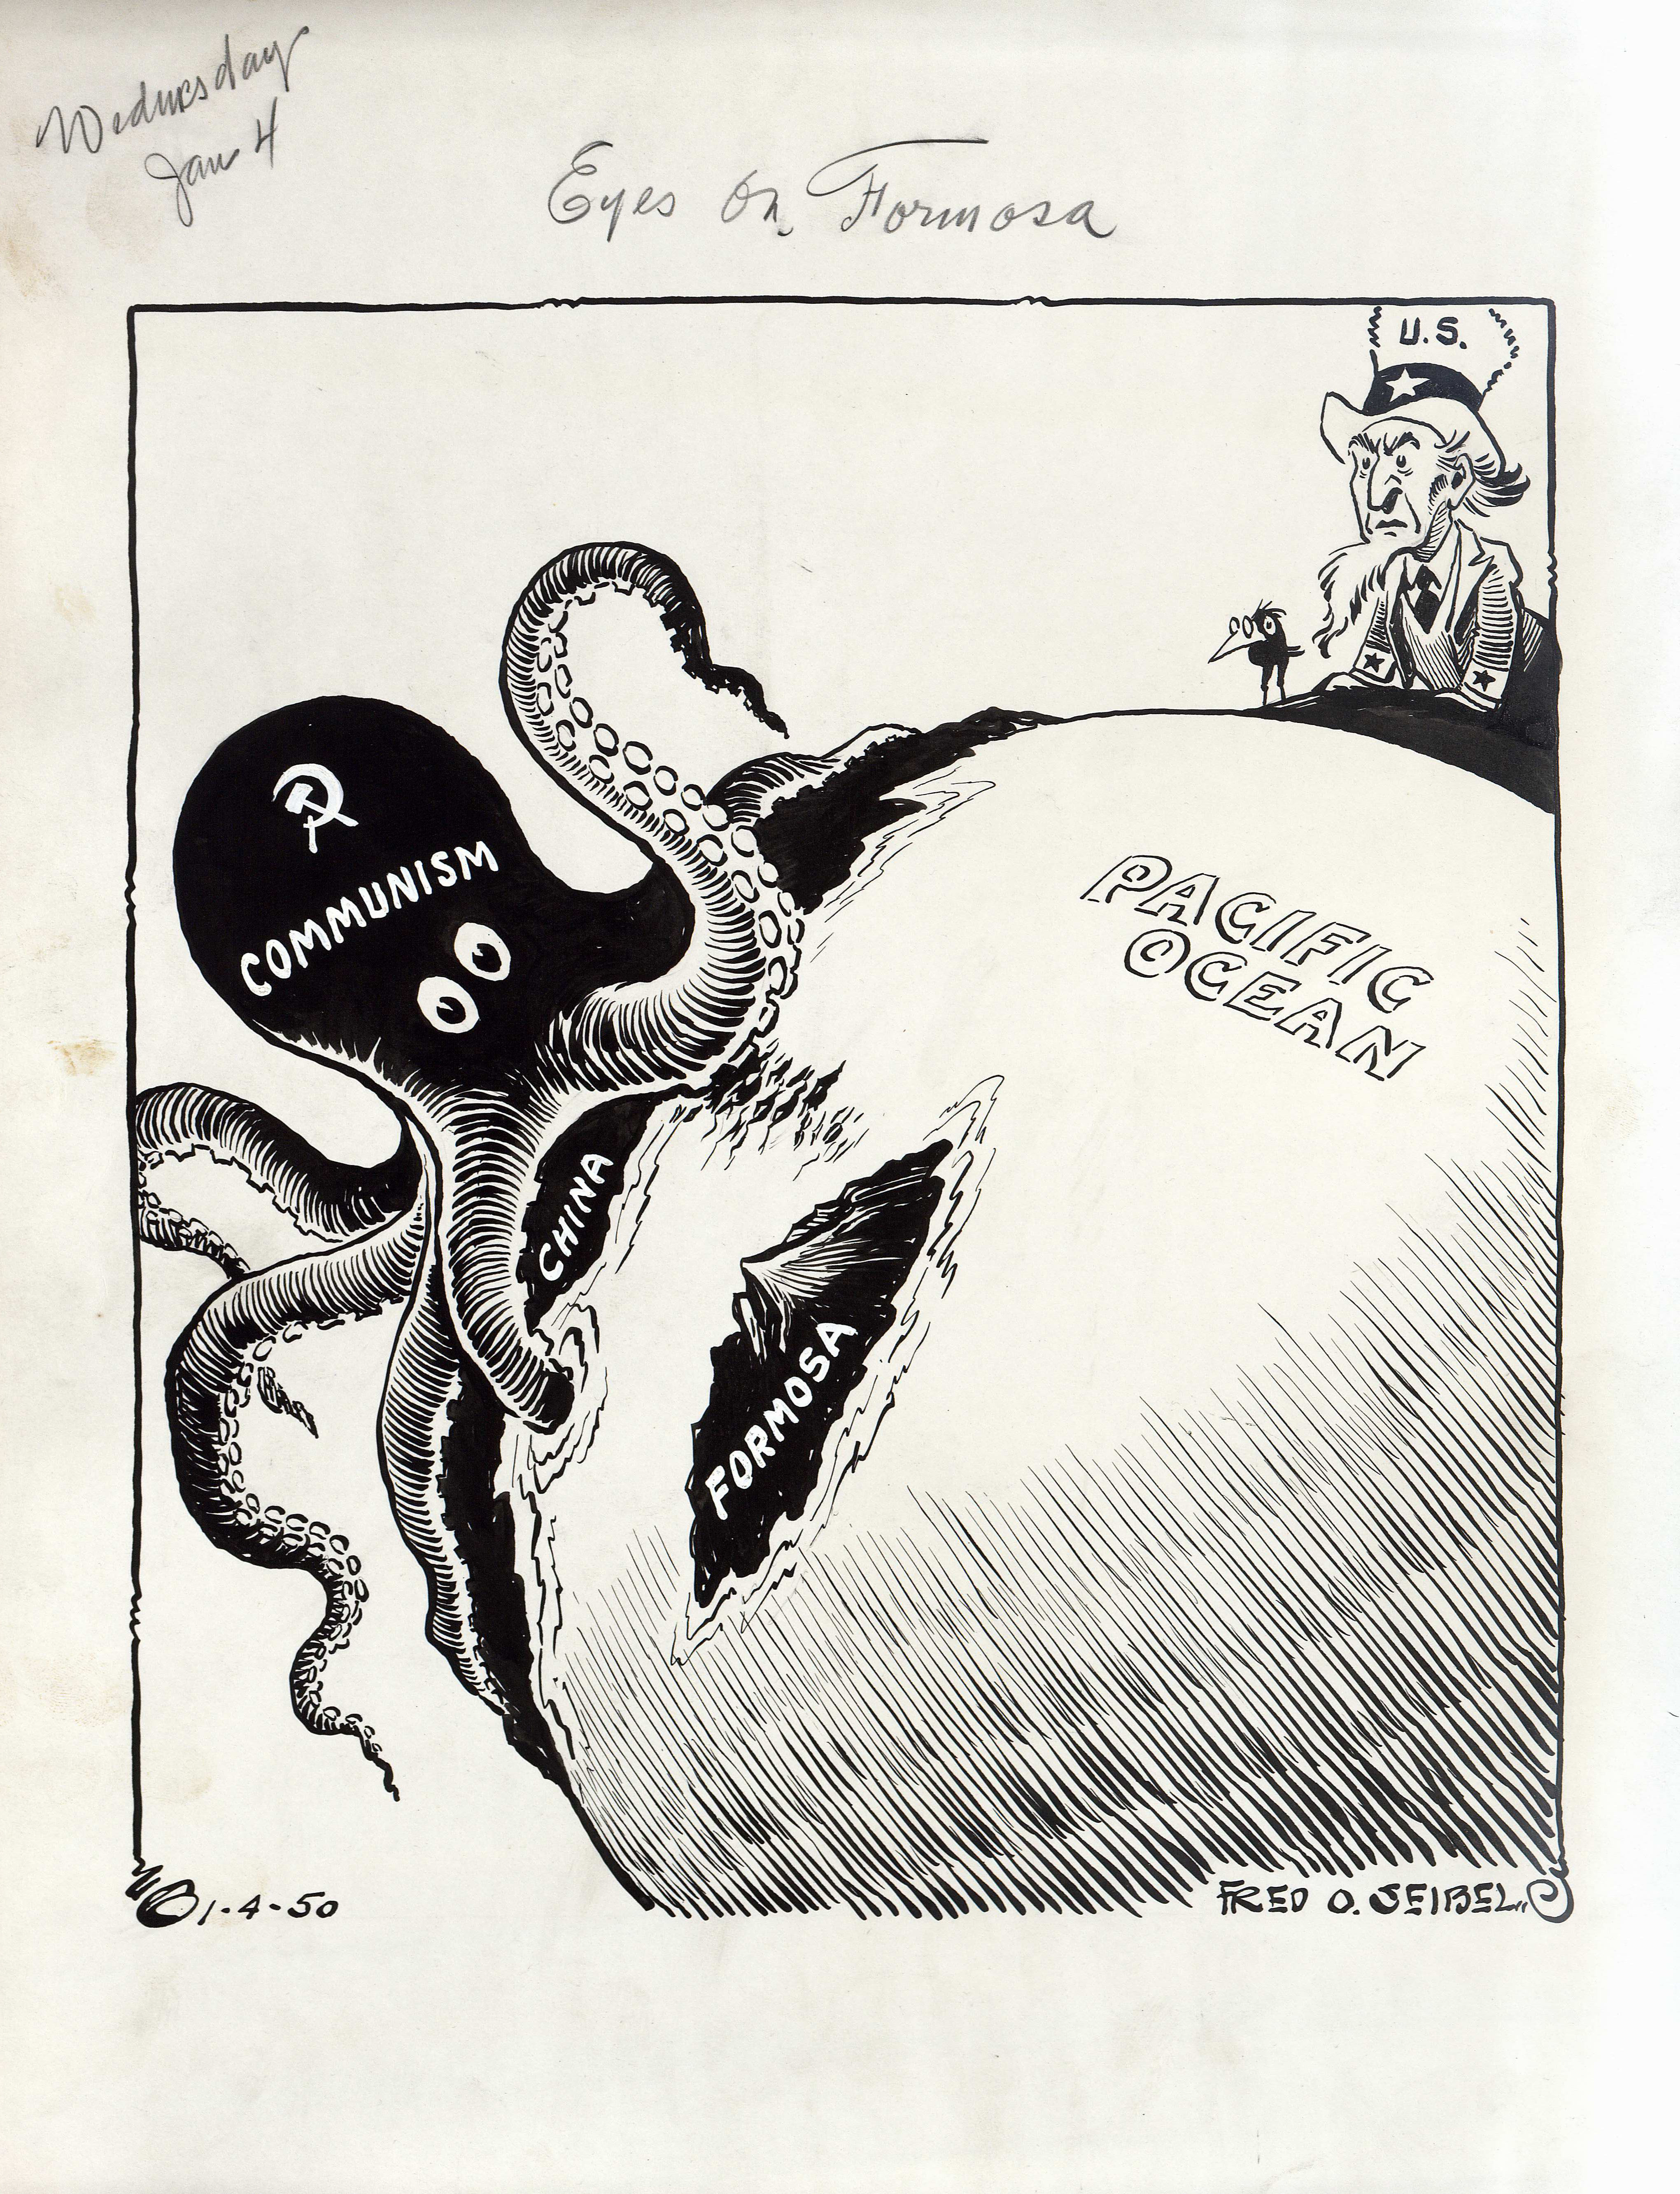 Siebel, Fred O. "Eyes on Formosa." Richmond Times Dispatch. 1 Jan. 1950. Original drawing by Fred Seibel. Published in the Richmond Times Dispatch, this cartoon, drawn by Fred Siebel, is a piece of American anti-communist propaganda and political commentary. The depiction of communism as a gigantic octopus, embossed the Soviet Union’s hammer and sickle, is a clear statement of the American perspective of communism as an expansionary threat to the world. The cartoon is intending to convey the intent of the communists specifically in China of taking over the island of Formosa, now known as Taiwan.    (still need permission)